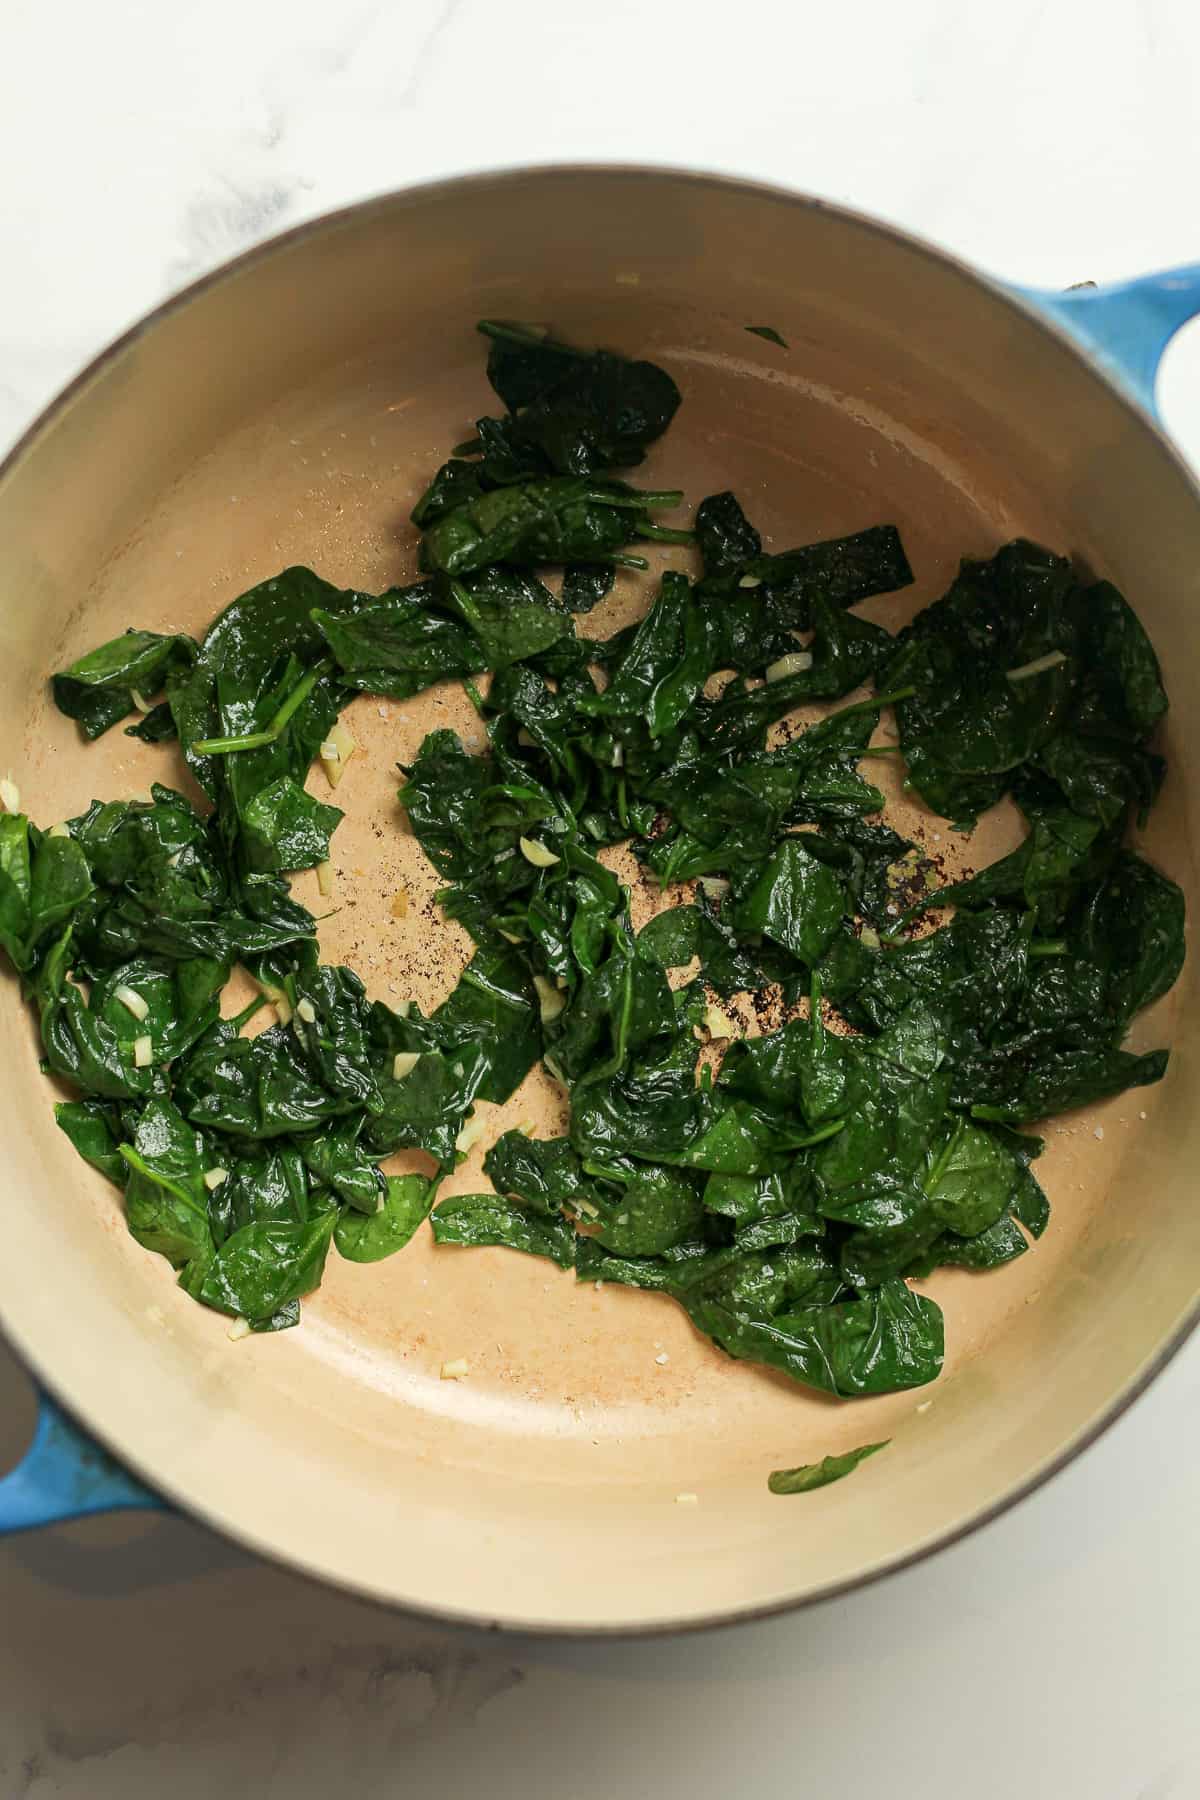 A pan of the cooked spinach.